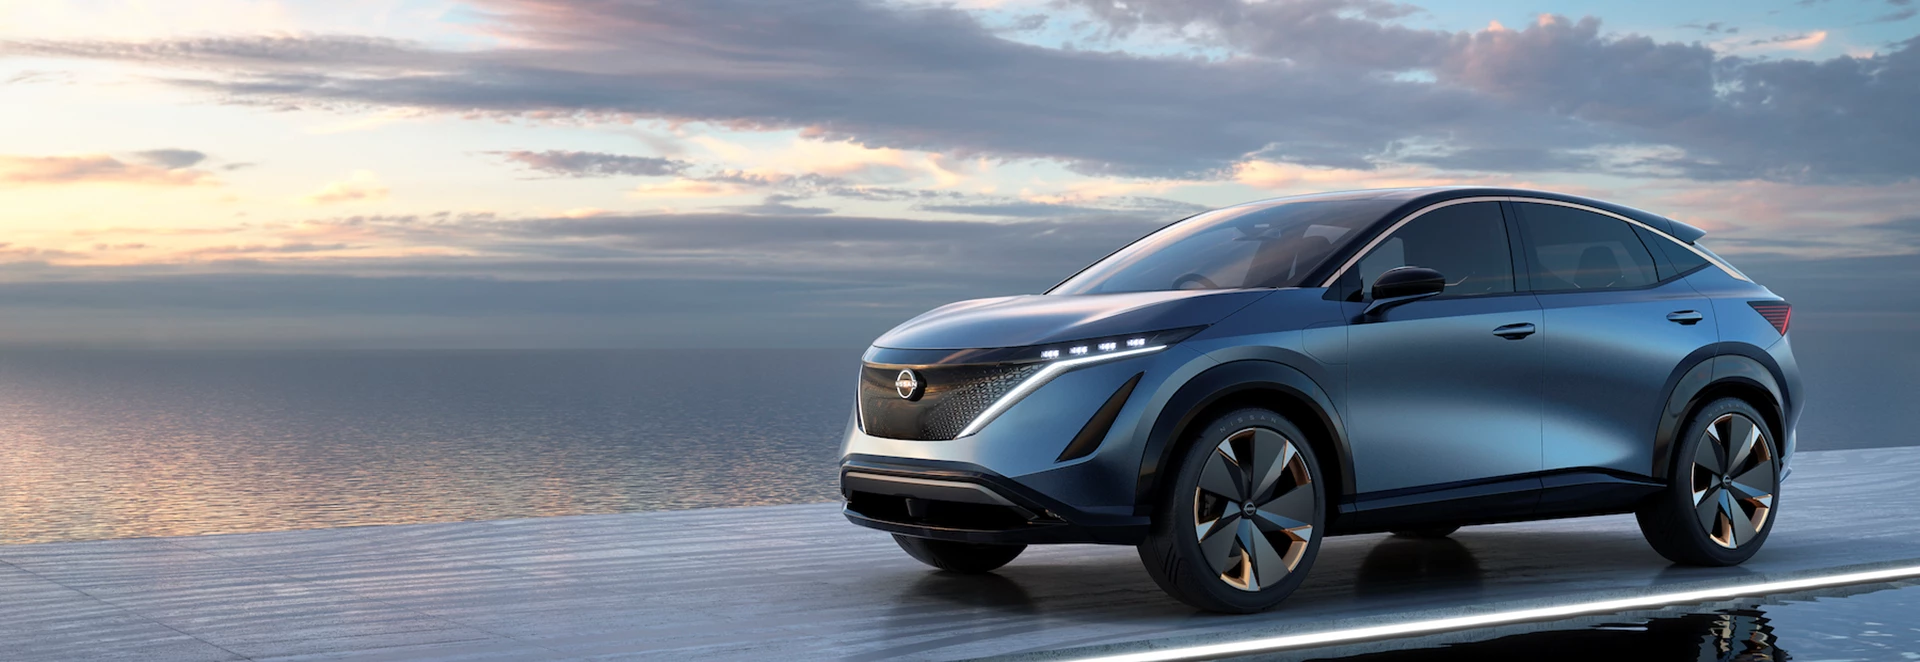 Nissan showcases what its future EVs will look like with the Ariya concept